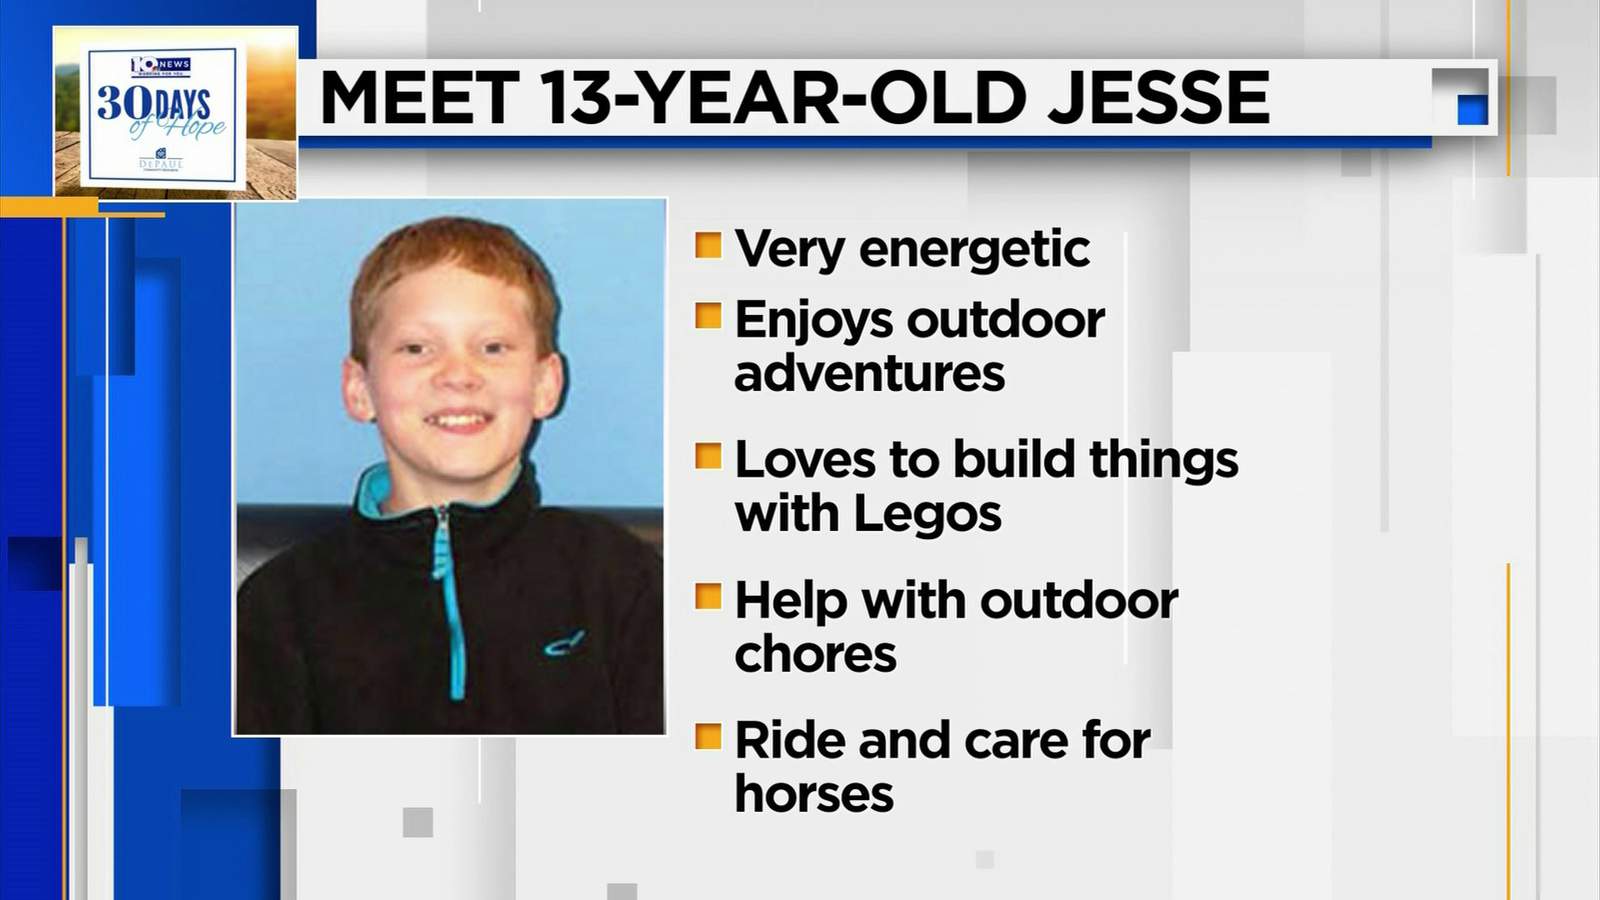 Jesse is still looking for a family: 30 Days of Hope